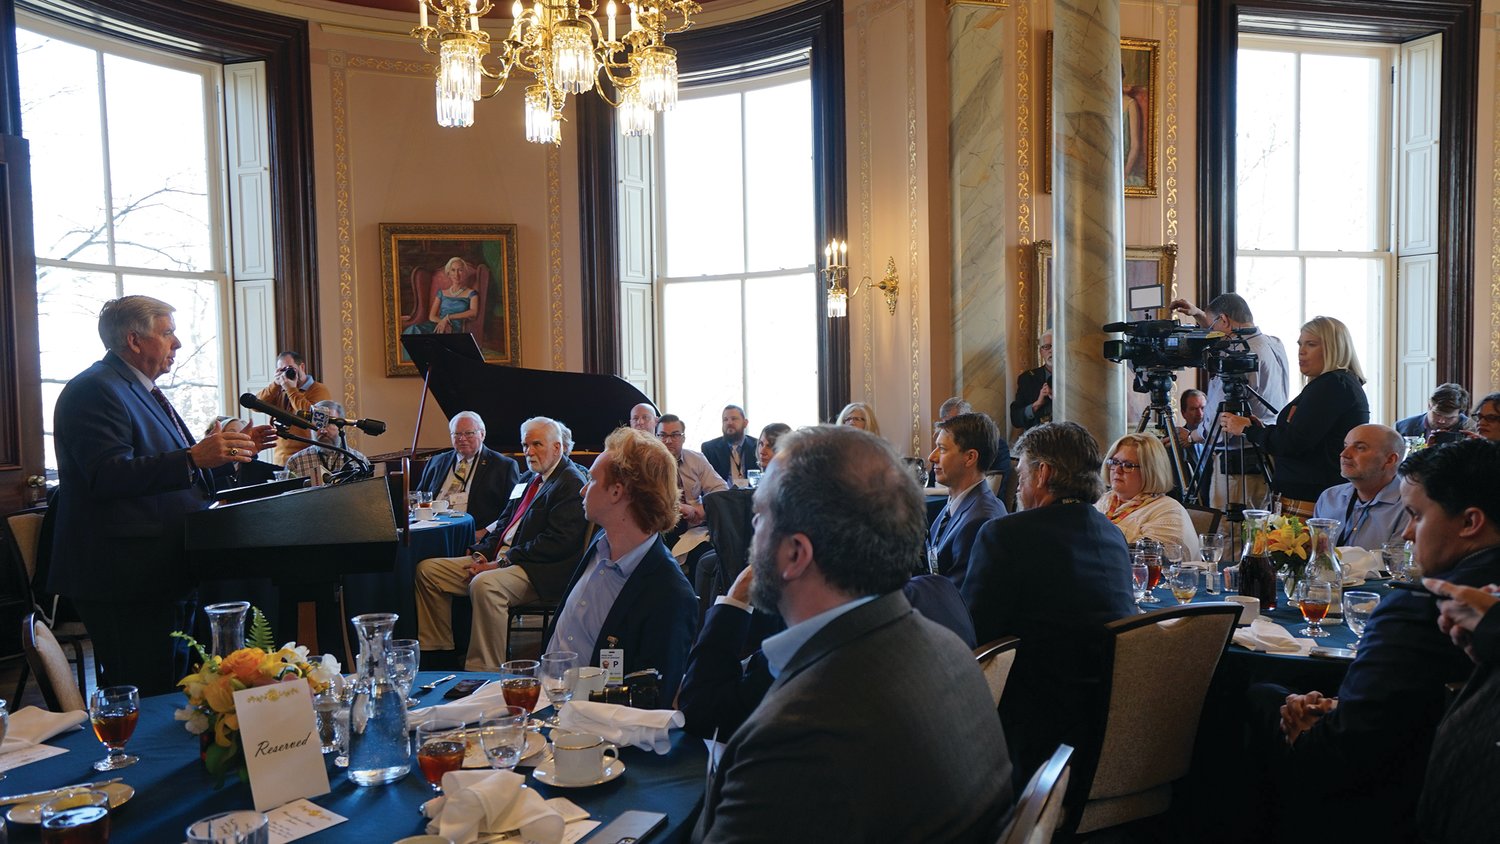 Gov. Mike Parson speaks on March 3 to members of the Missouri Press Association after a luncheon at the governor’s mansion. (Photo courtesy of Governor’s Office)